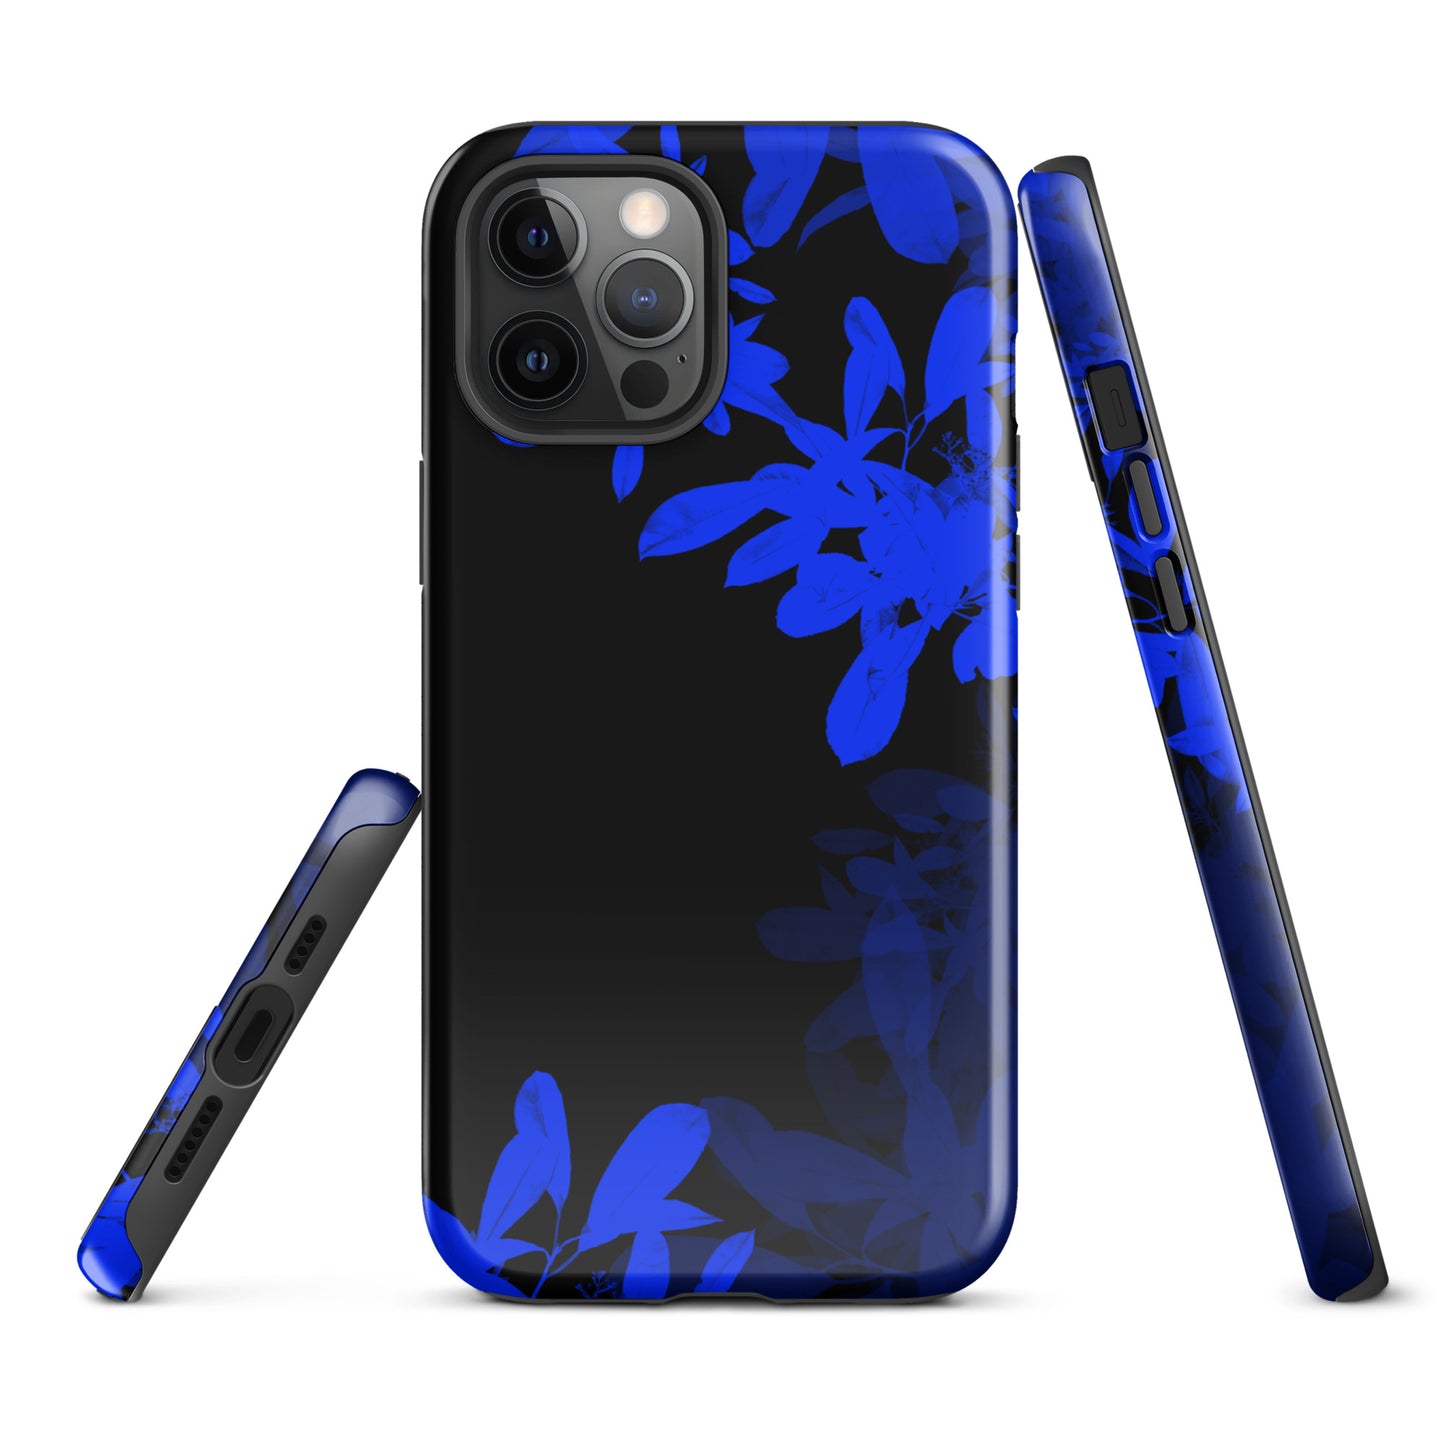 A Night Blue Plant Case for the iPhone 12 Pro Max